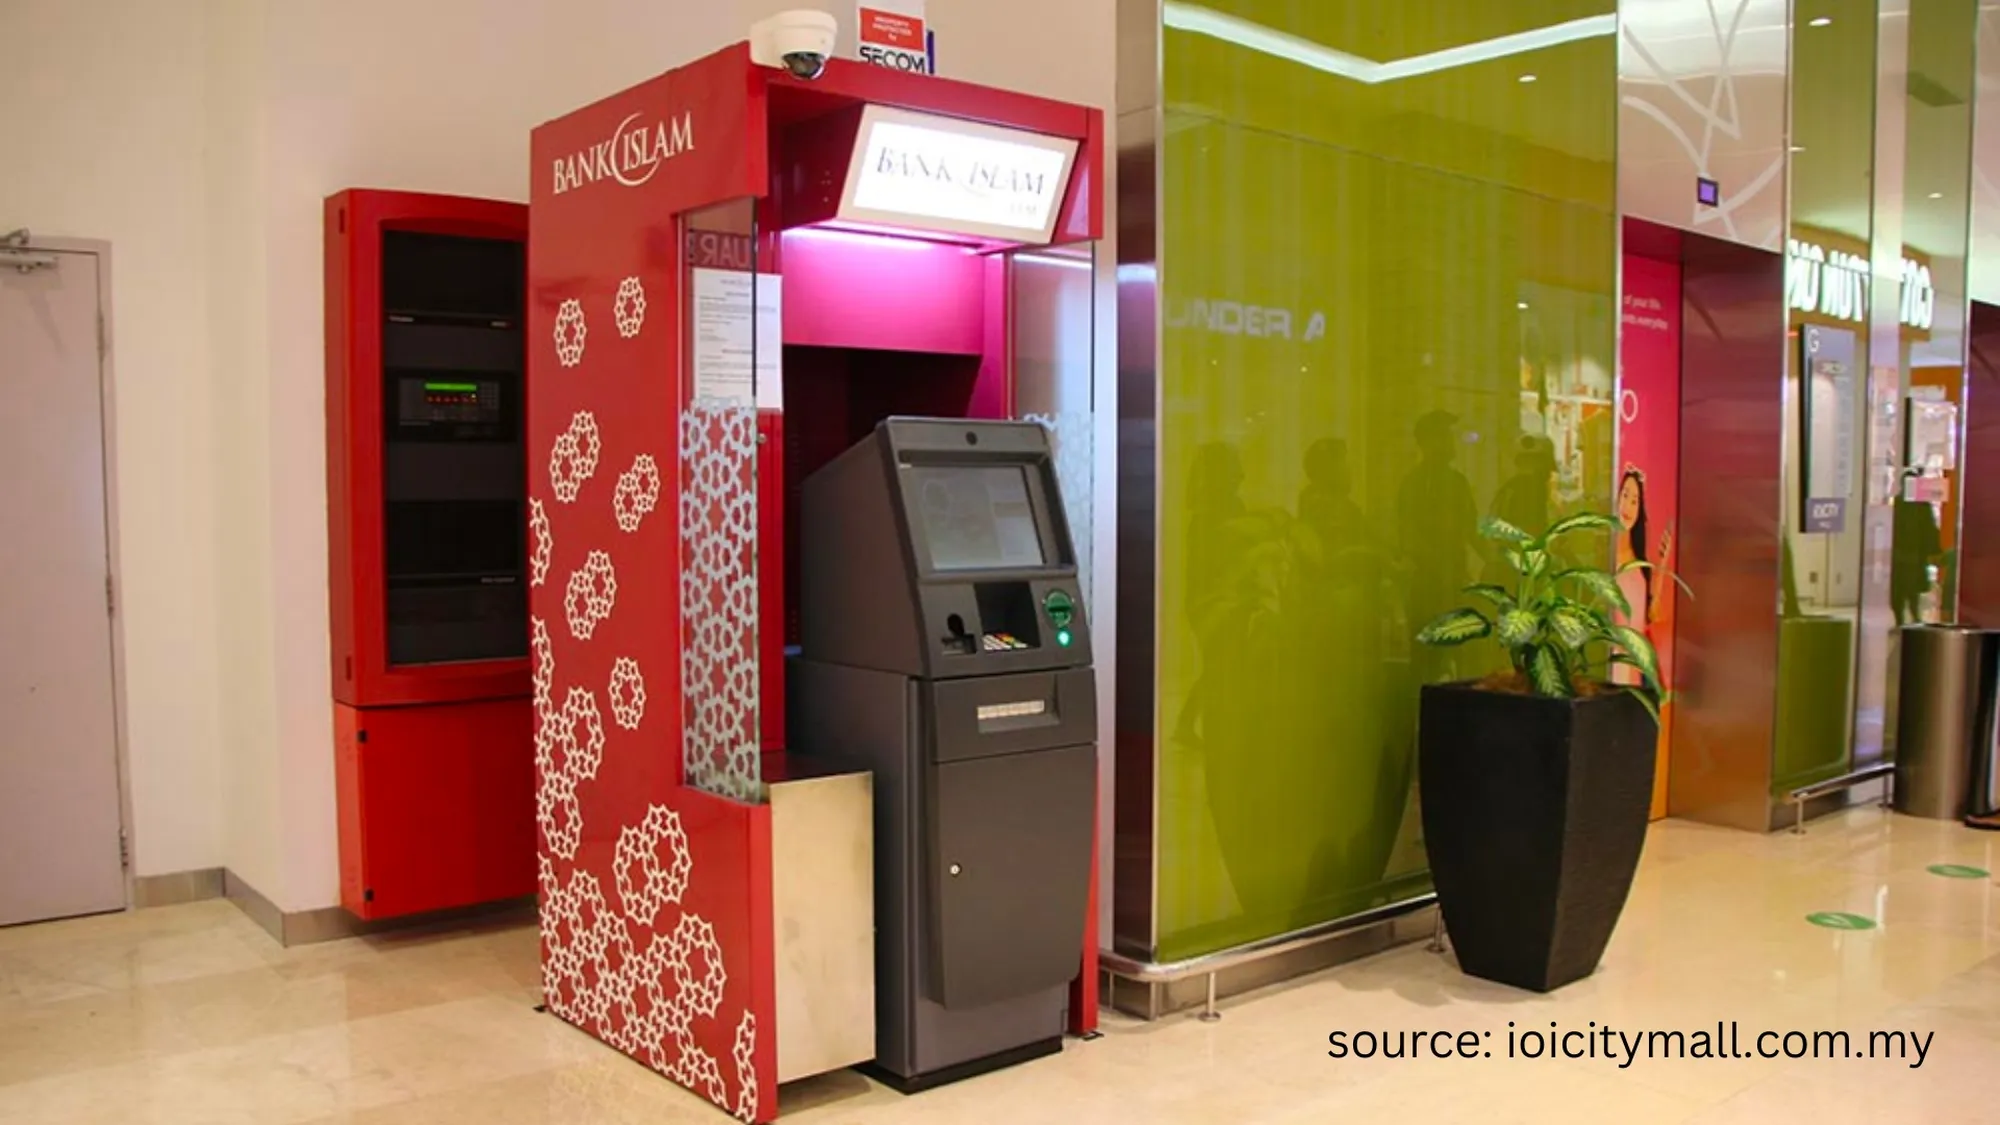 how to withdraw money at bank islam withdraw atm machine